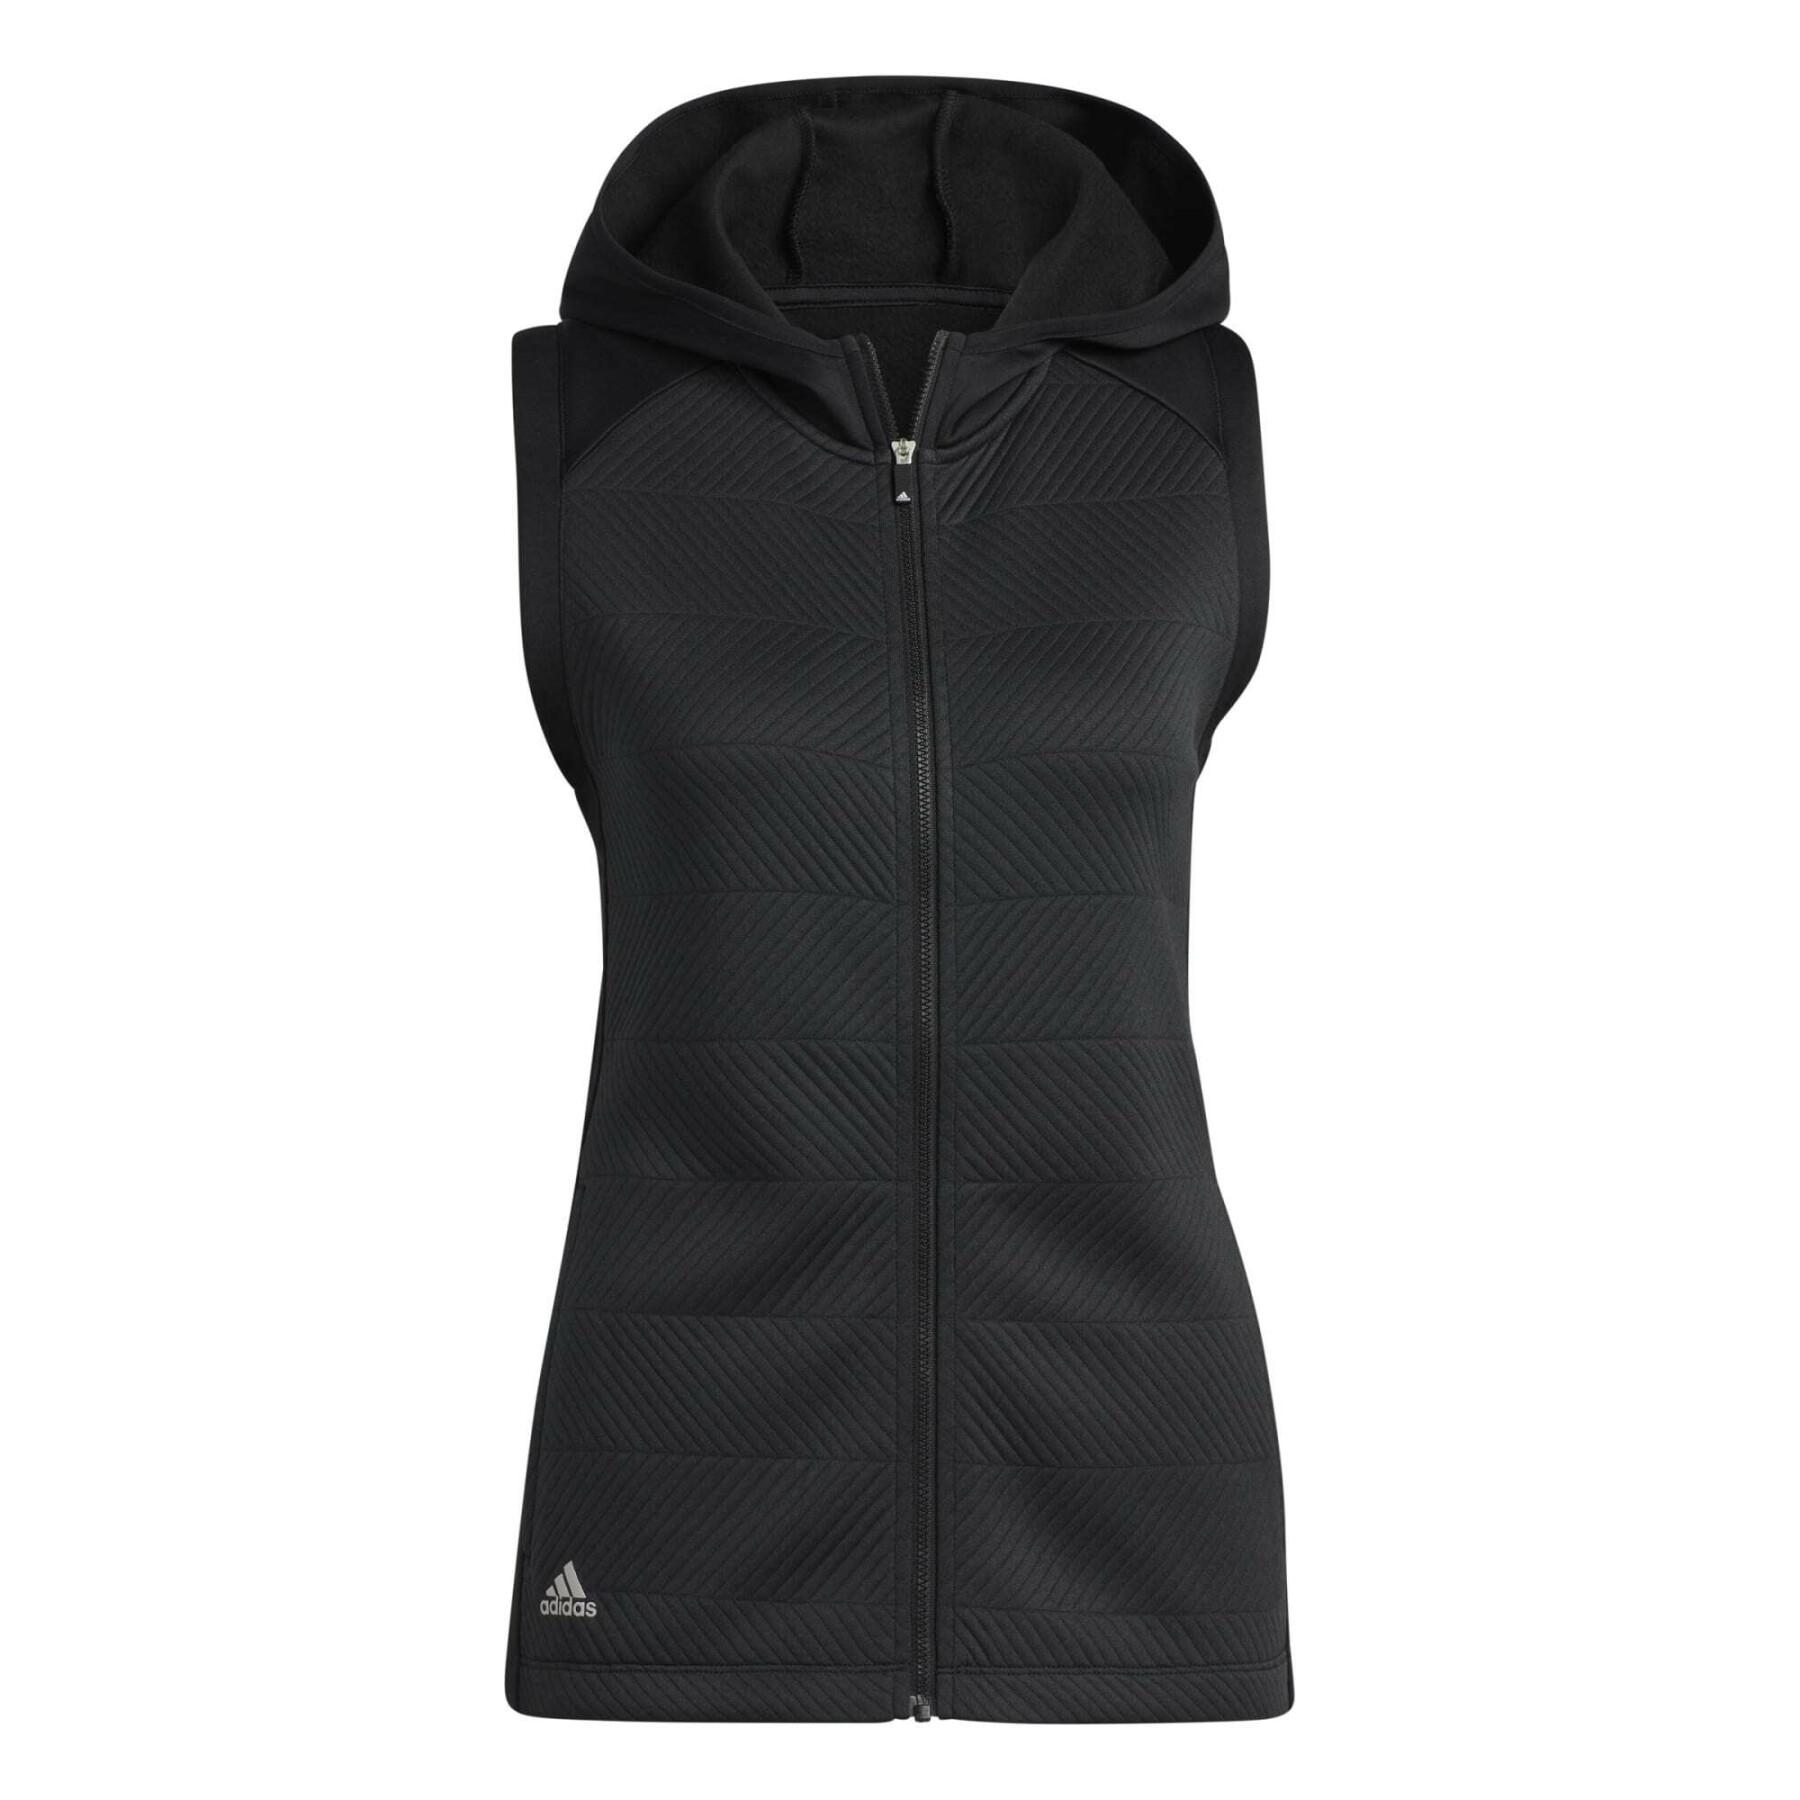 Sleeveless zipped jacket for women adidas Cold Rdy